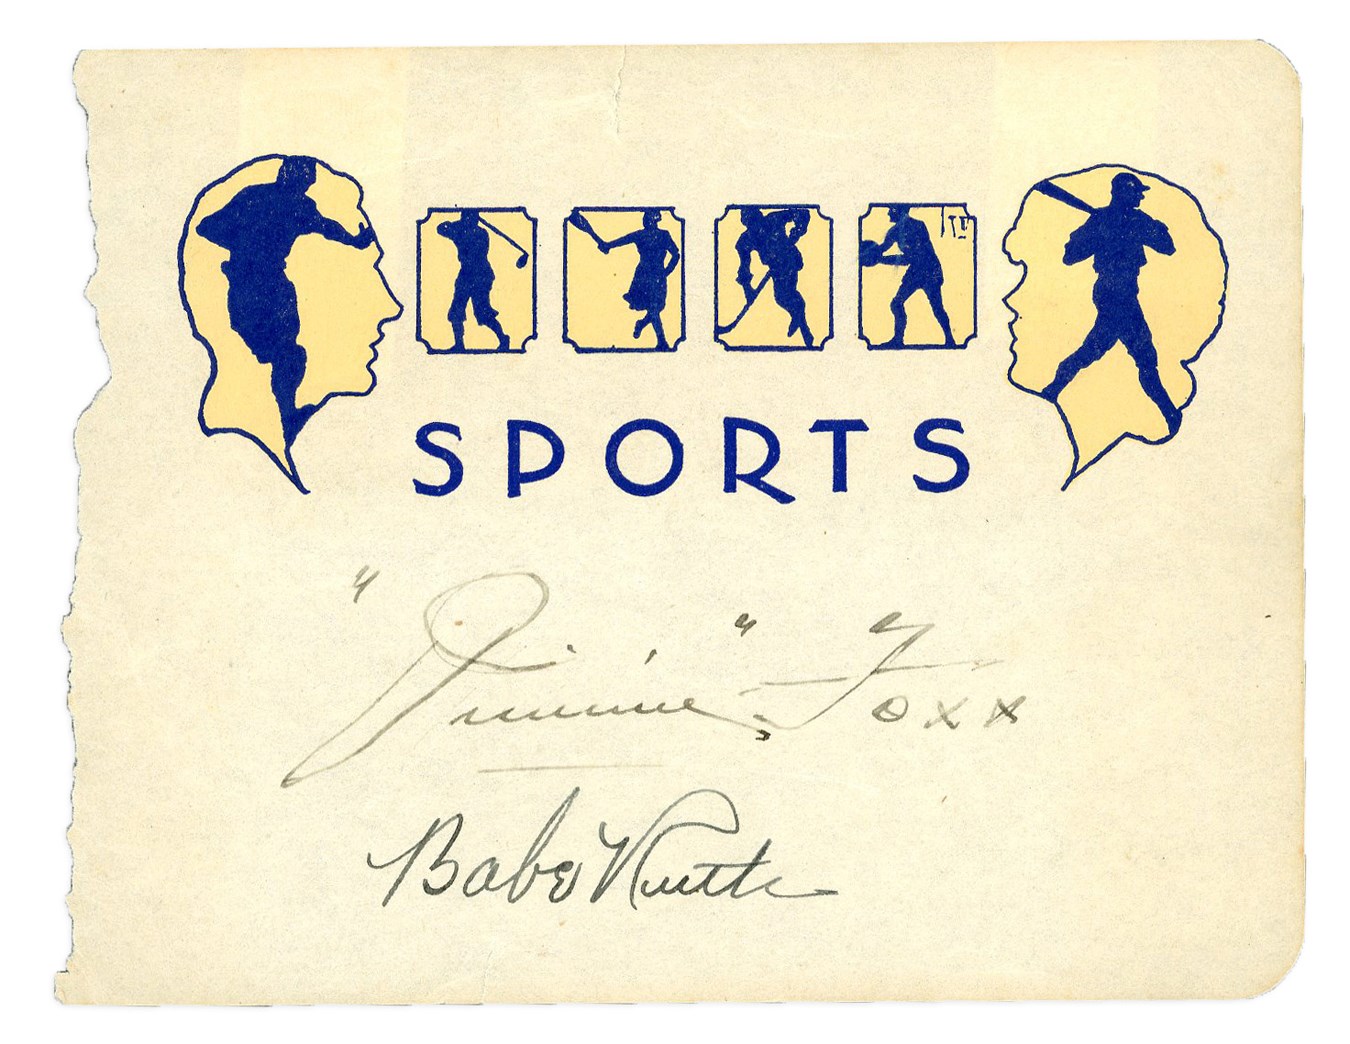 Babe Ruth & Jimmie Foxx Dual-Signed Sports Album Page - First Two 500 Home Run Hitters (PSA/DNA)